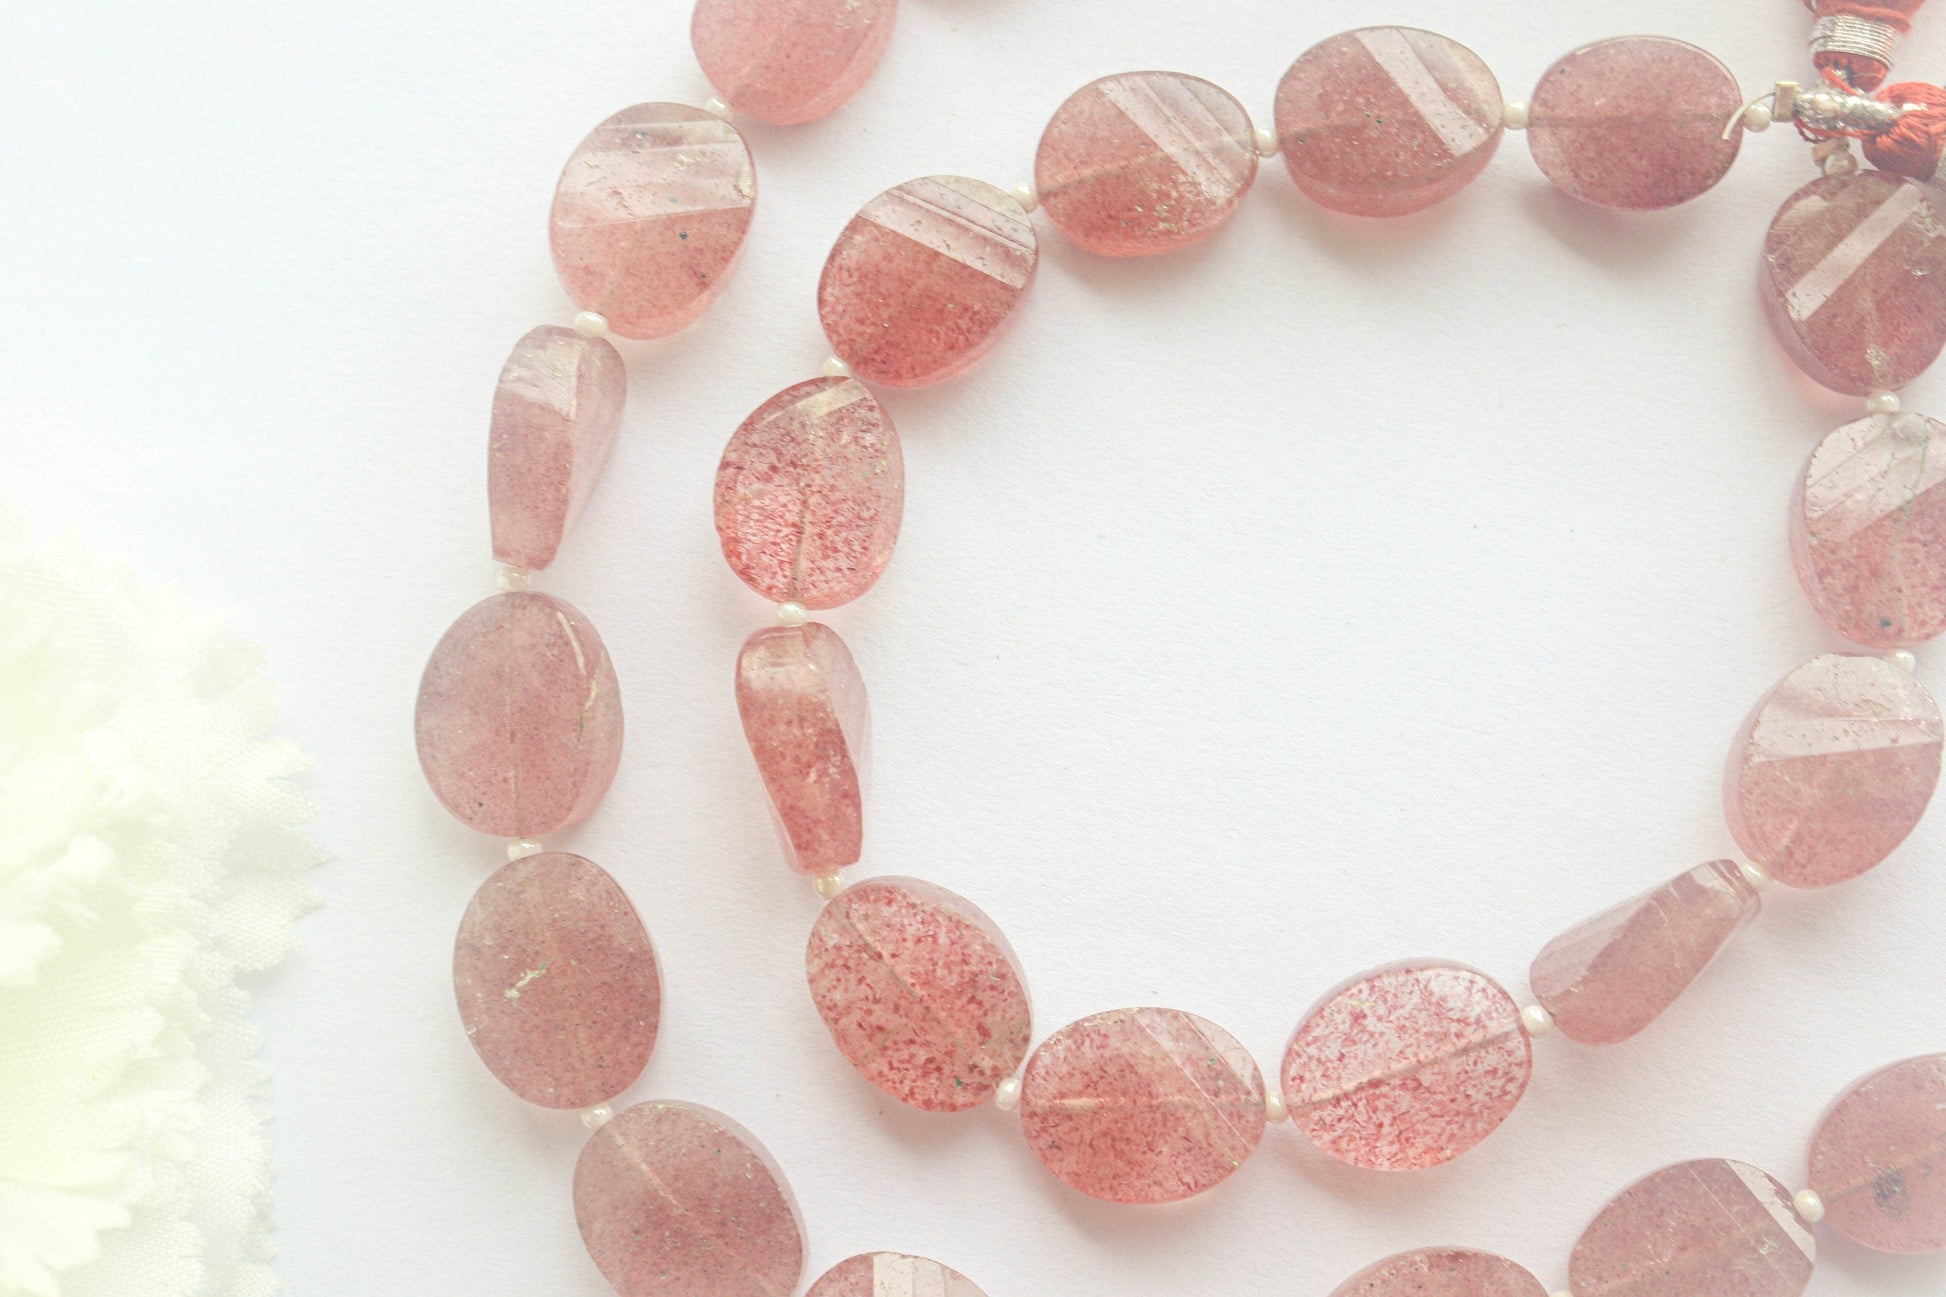 Pink Strawberry Quartz Twisted Oval Shape Faceted Beads | 8 Inch String | Natural Gemstone | 13 Pieces String | Beadsforyourjewelry Beadsforyourjewelry